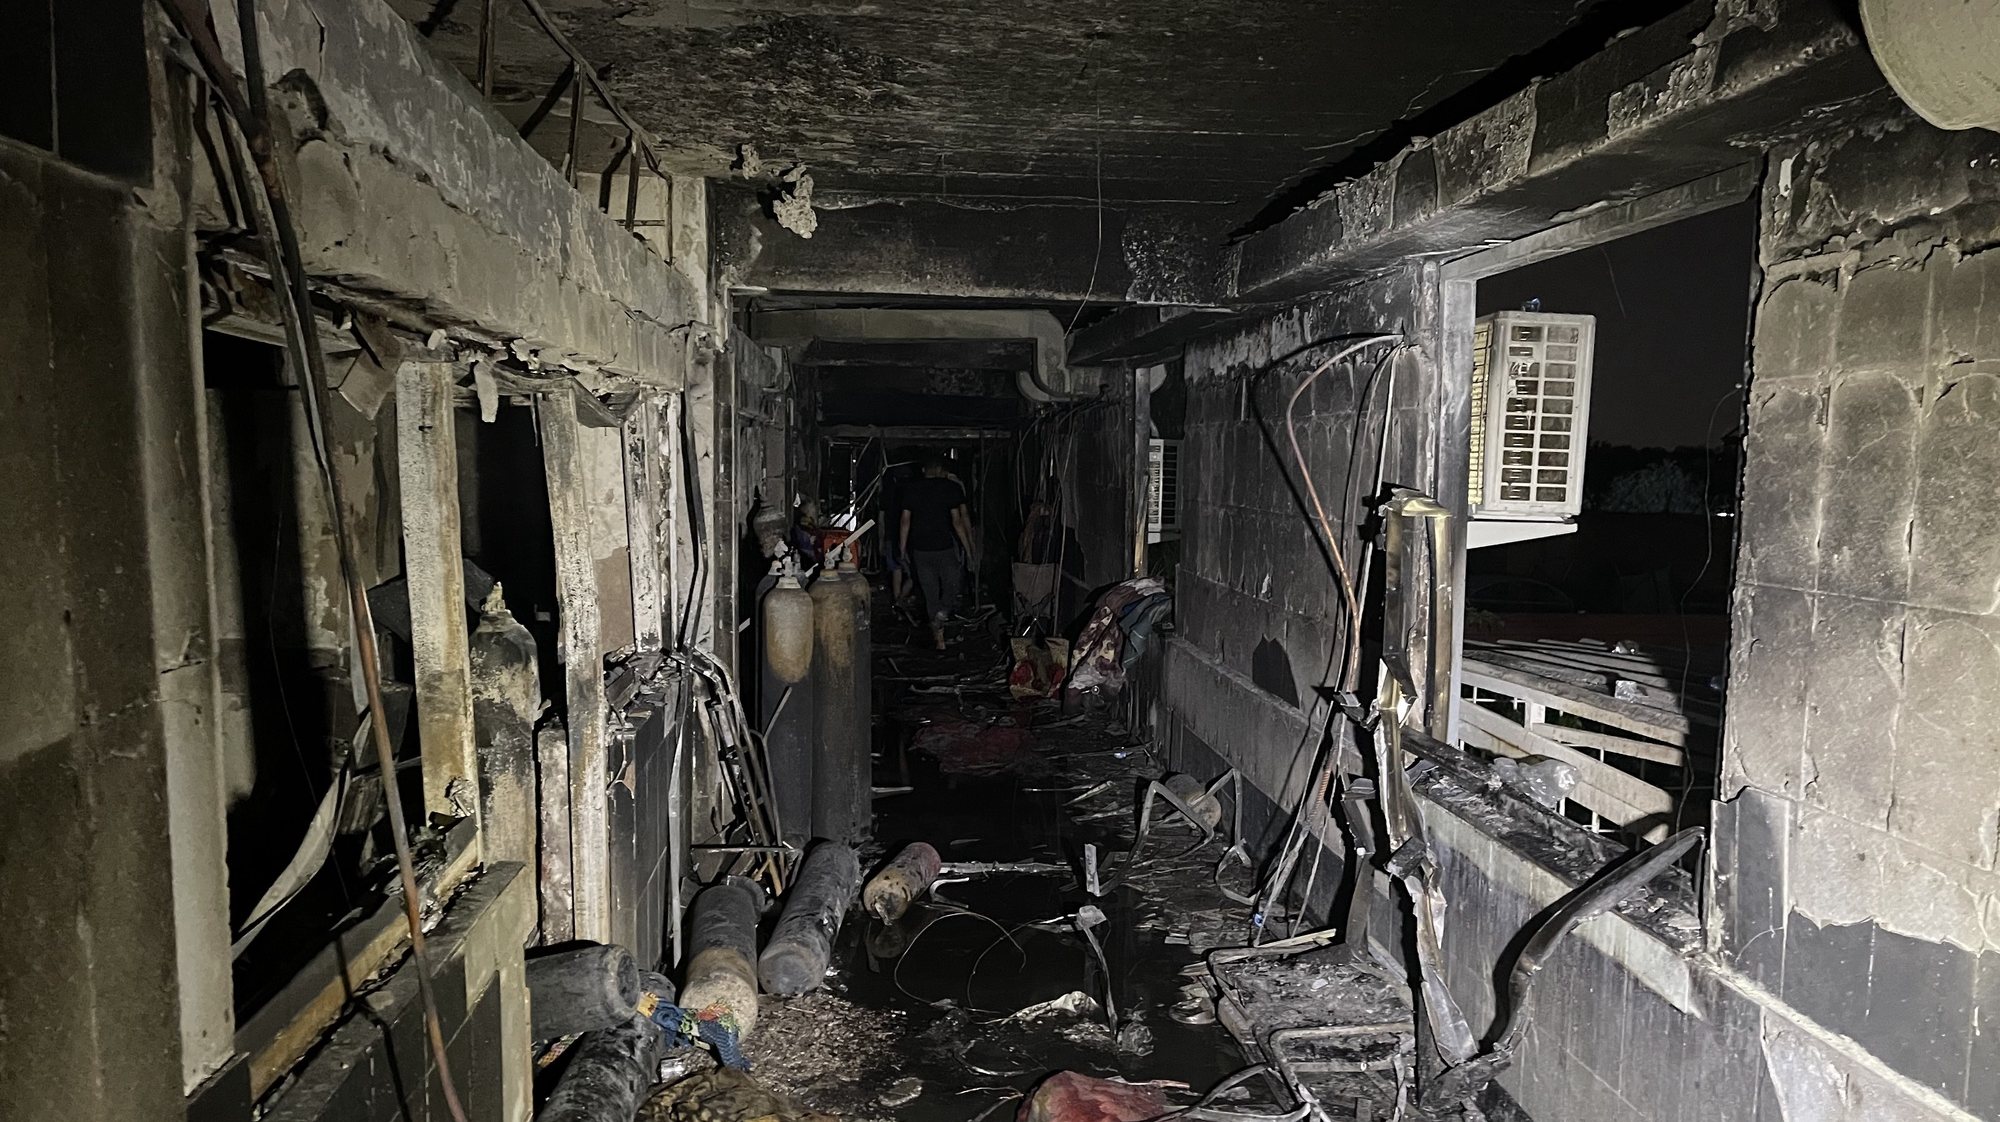 epa09157833 Aftermath of a fire at Ibn Al-Khatib Hospital, south of Baghdad, Iraq, 25 April 2021. At least 27 people died and dozens were injured when a fire broke out following the explosion of oxygen tanks at the hospital equipped to treat COVID-19 patients on 24 April.  EPA/MURTAJA LATEEF